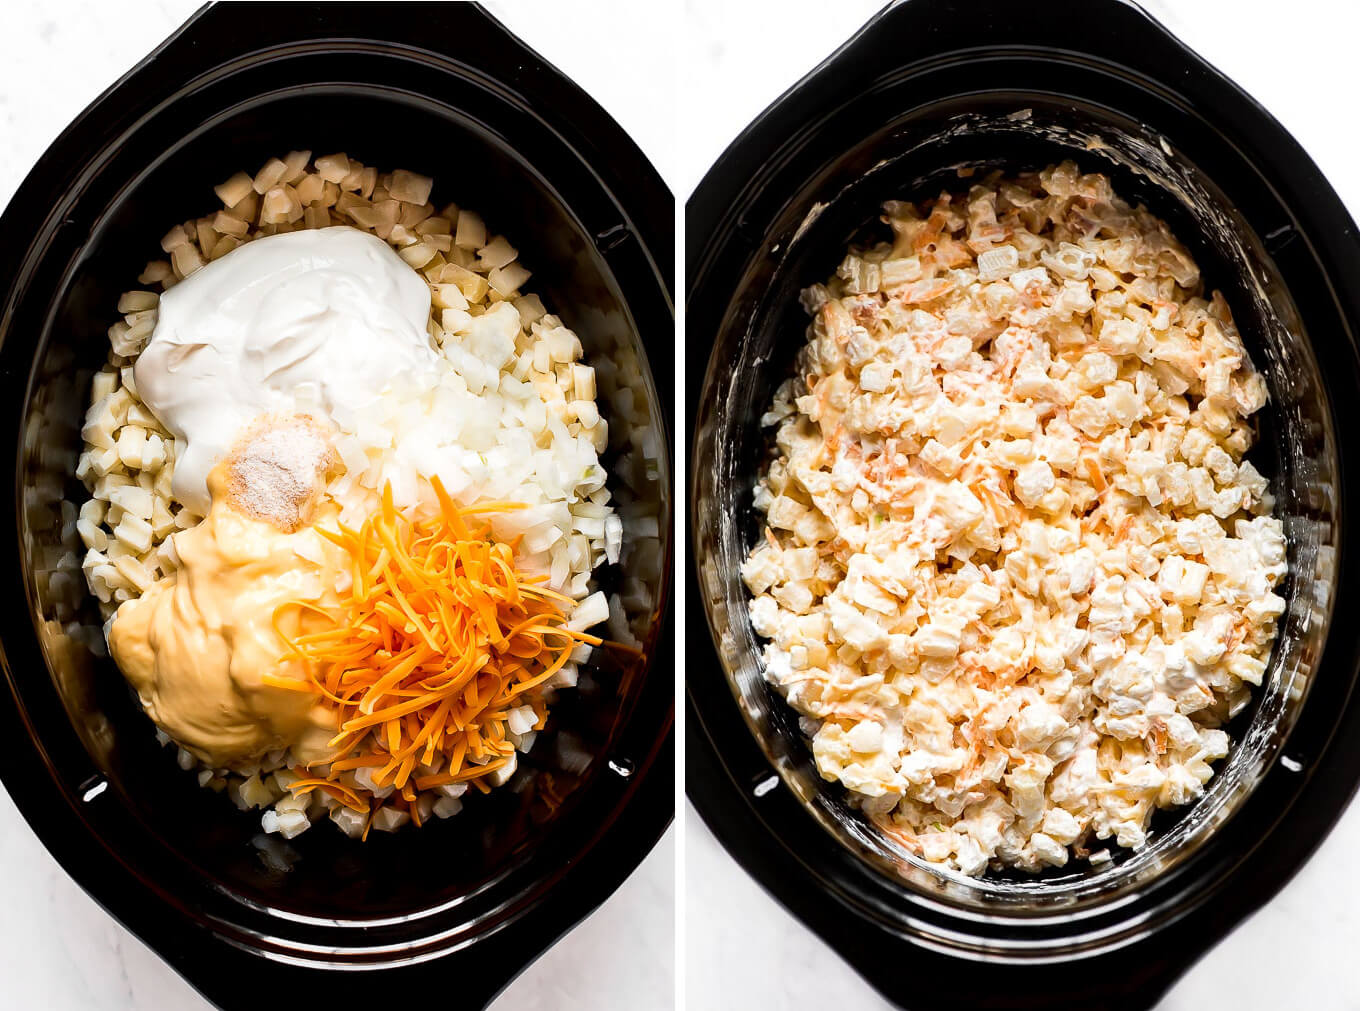 Two images of crockpots- One shows hashbrowns, sour cream, cream of chicken soup, shredded cheese, and onion in a pot; Second image shows them all mixed together.